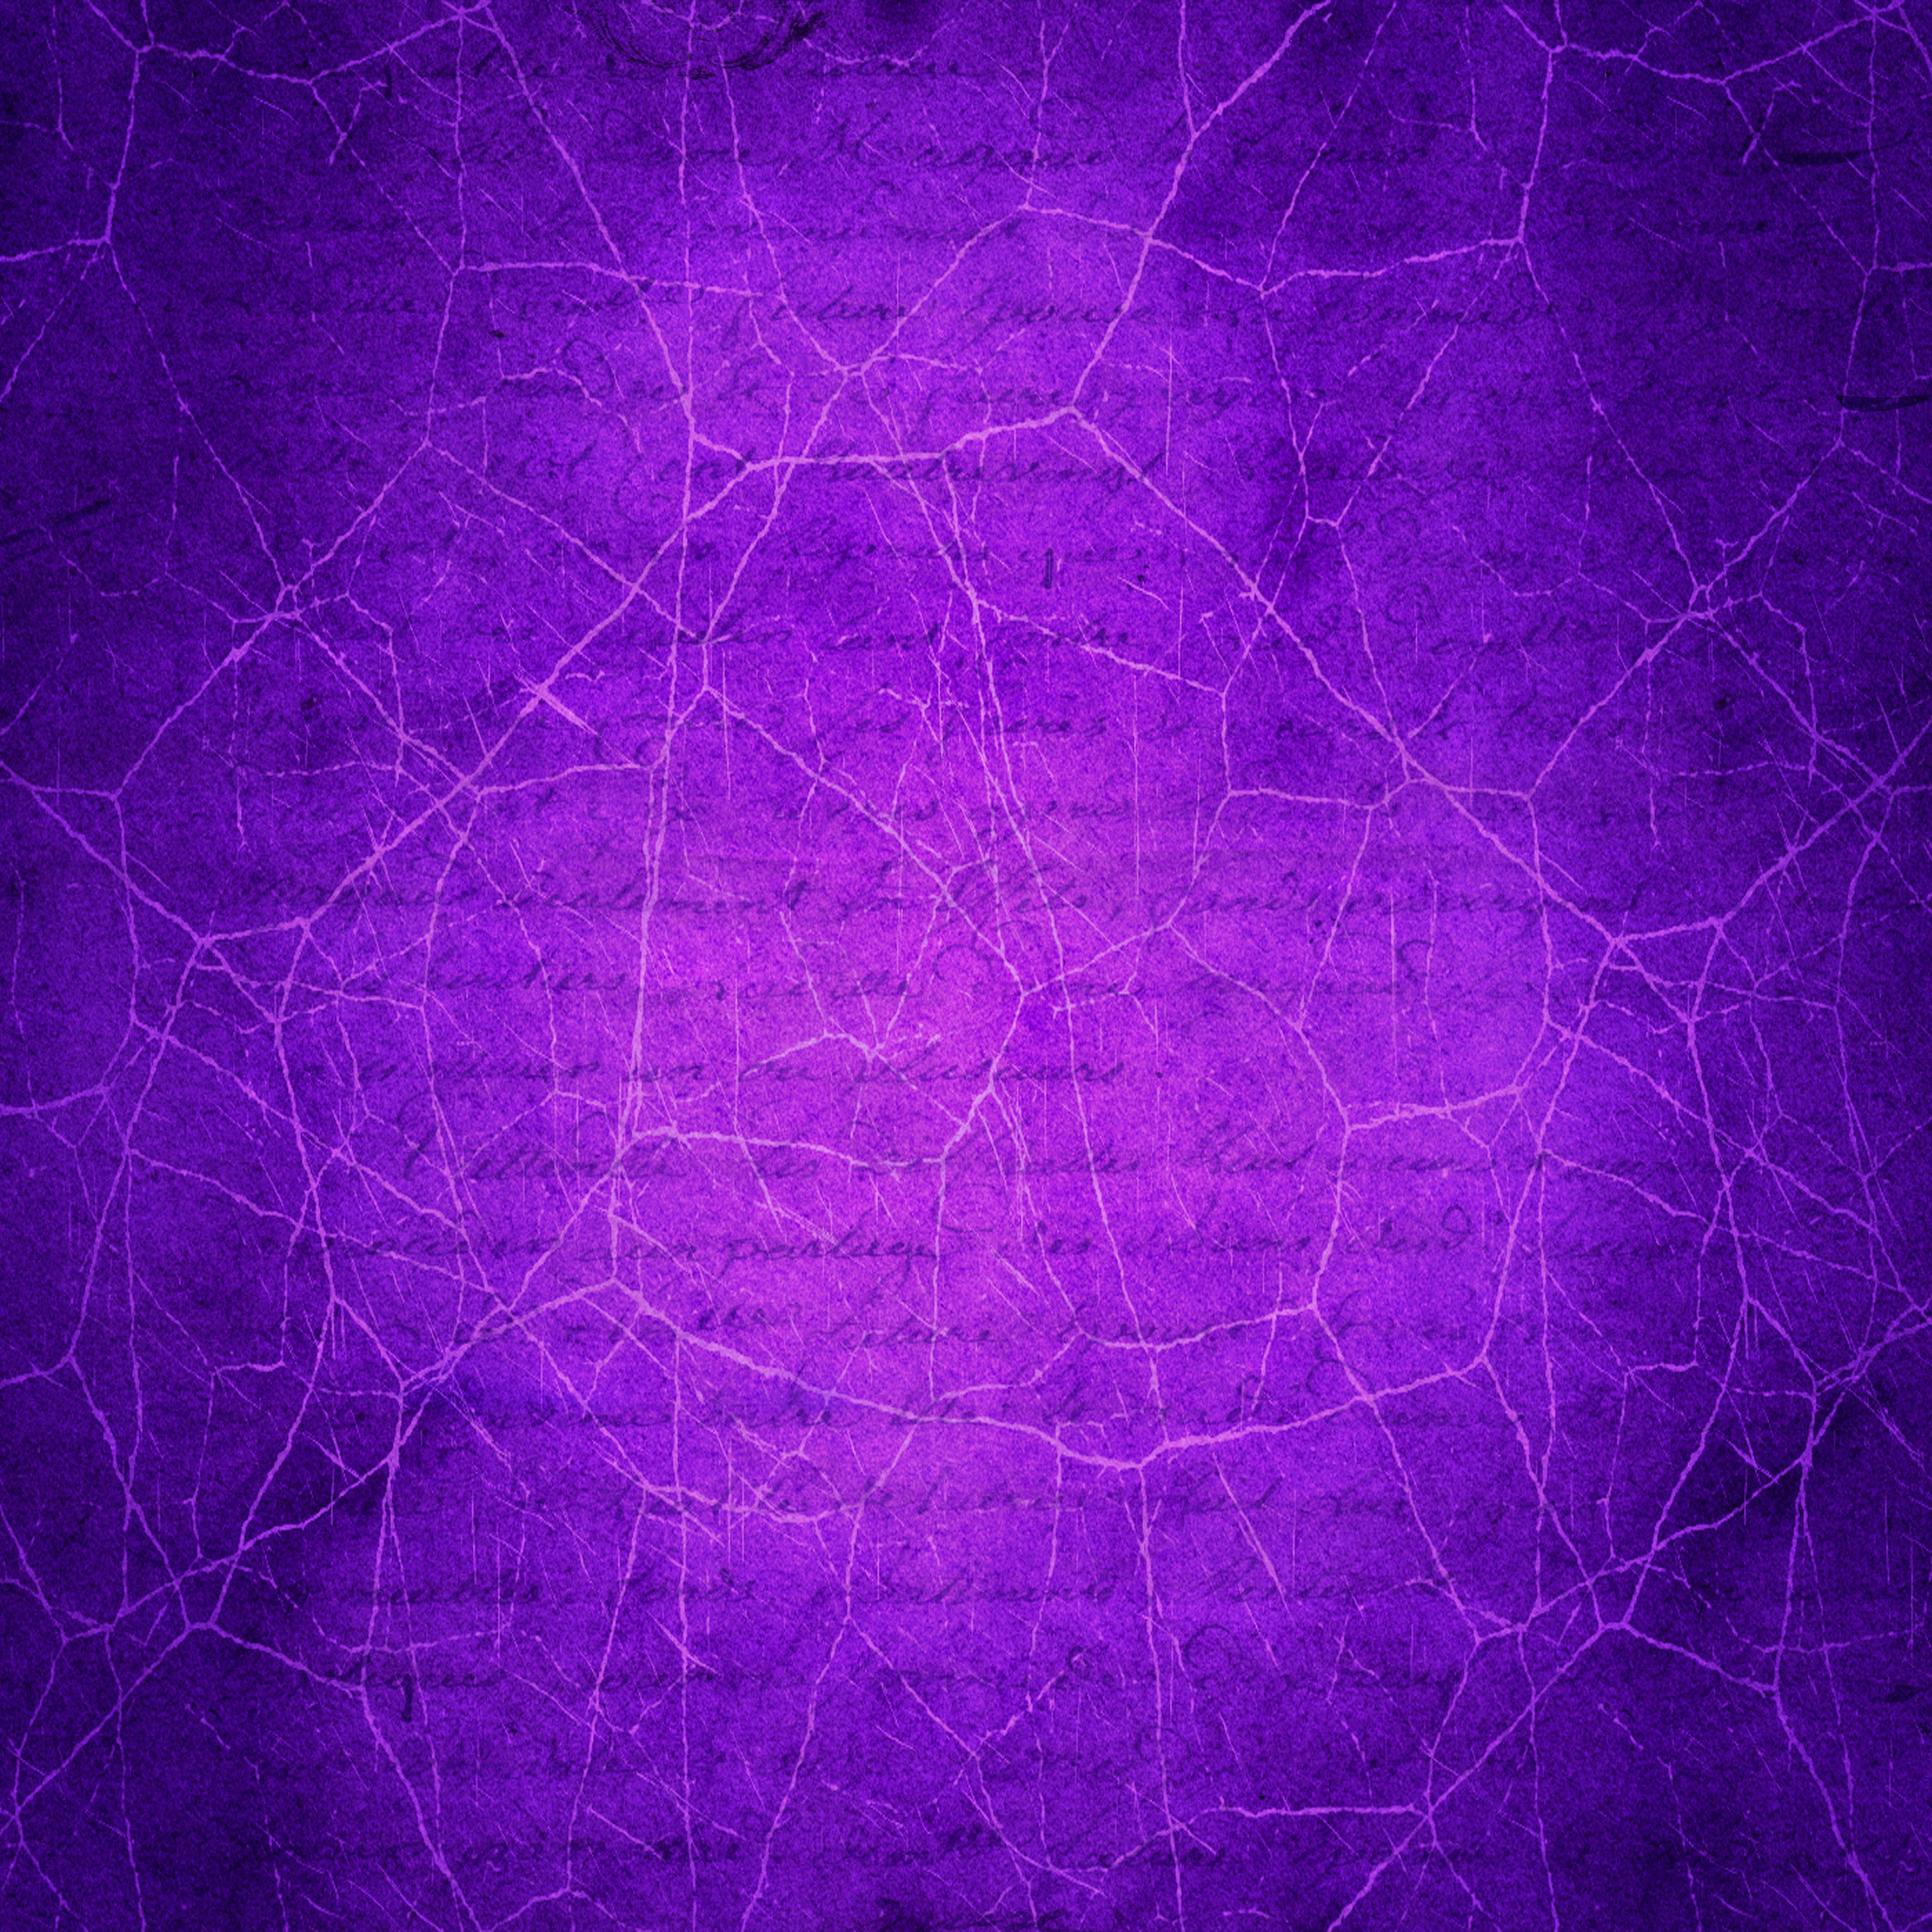 Free Images textures, purple, ancient, old Paper